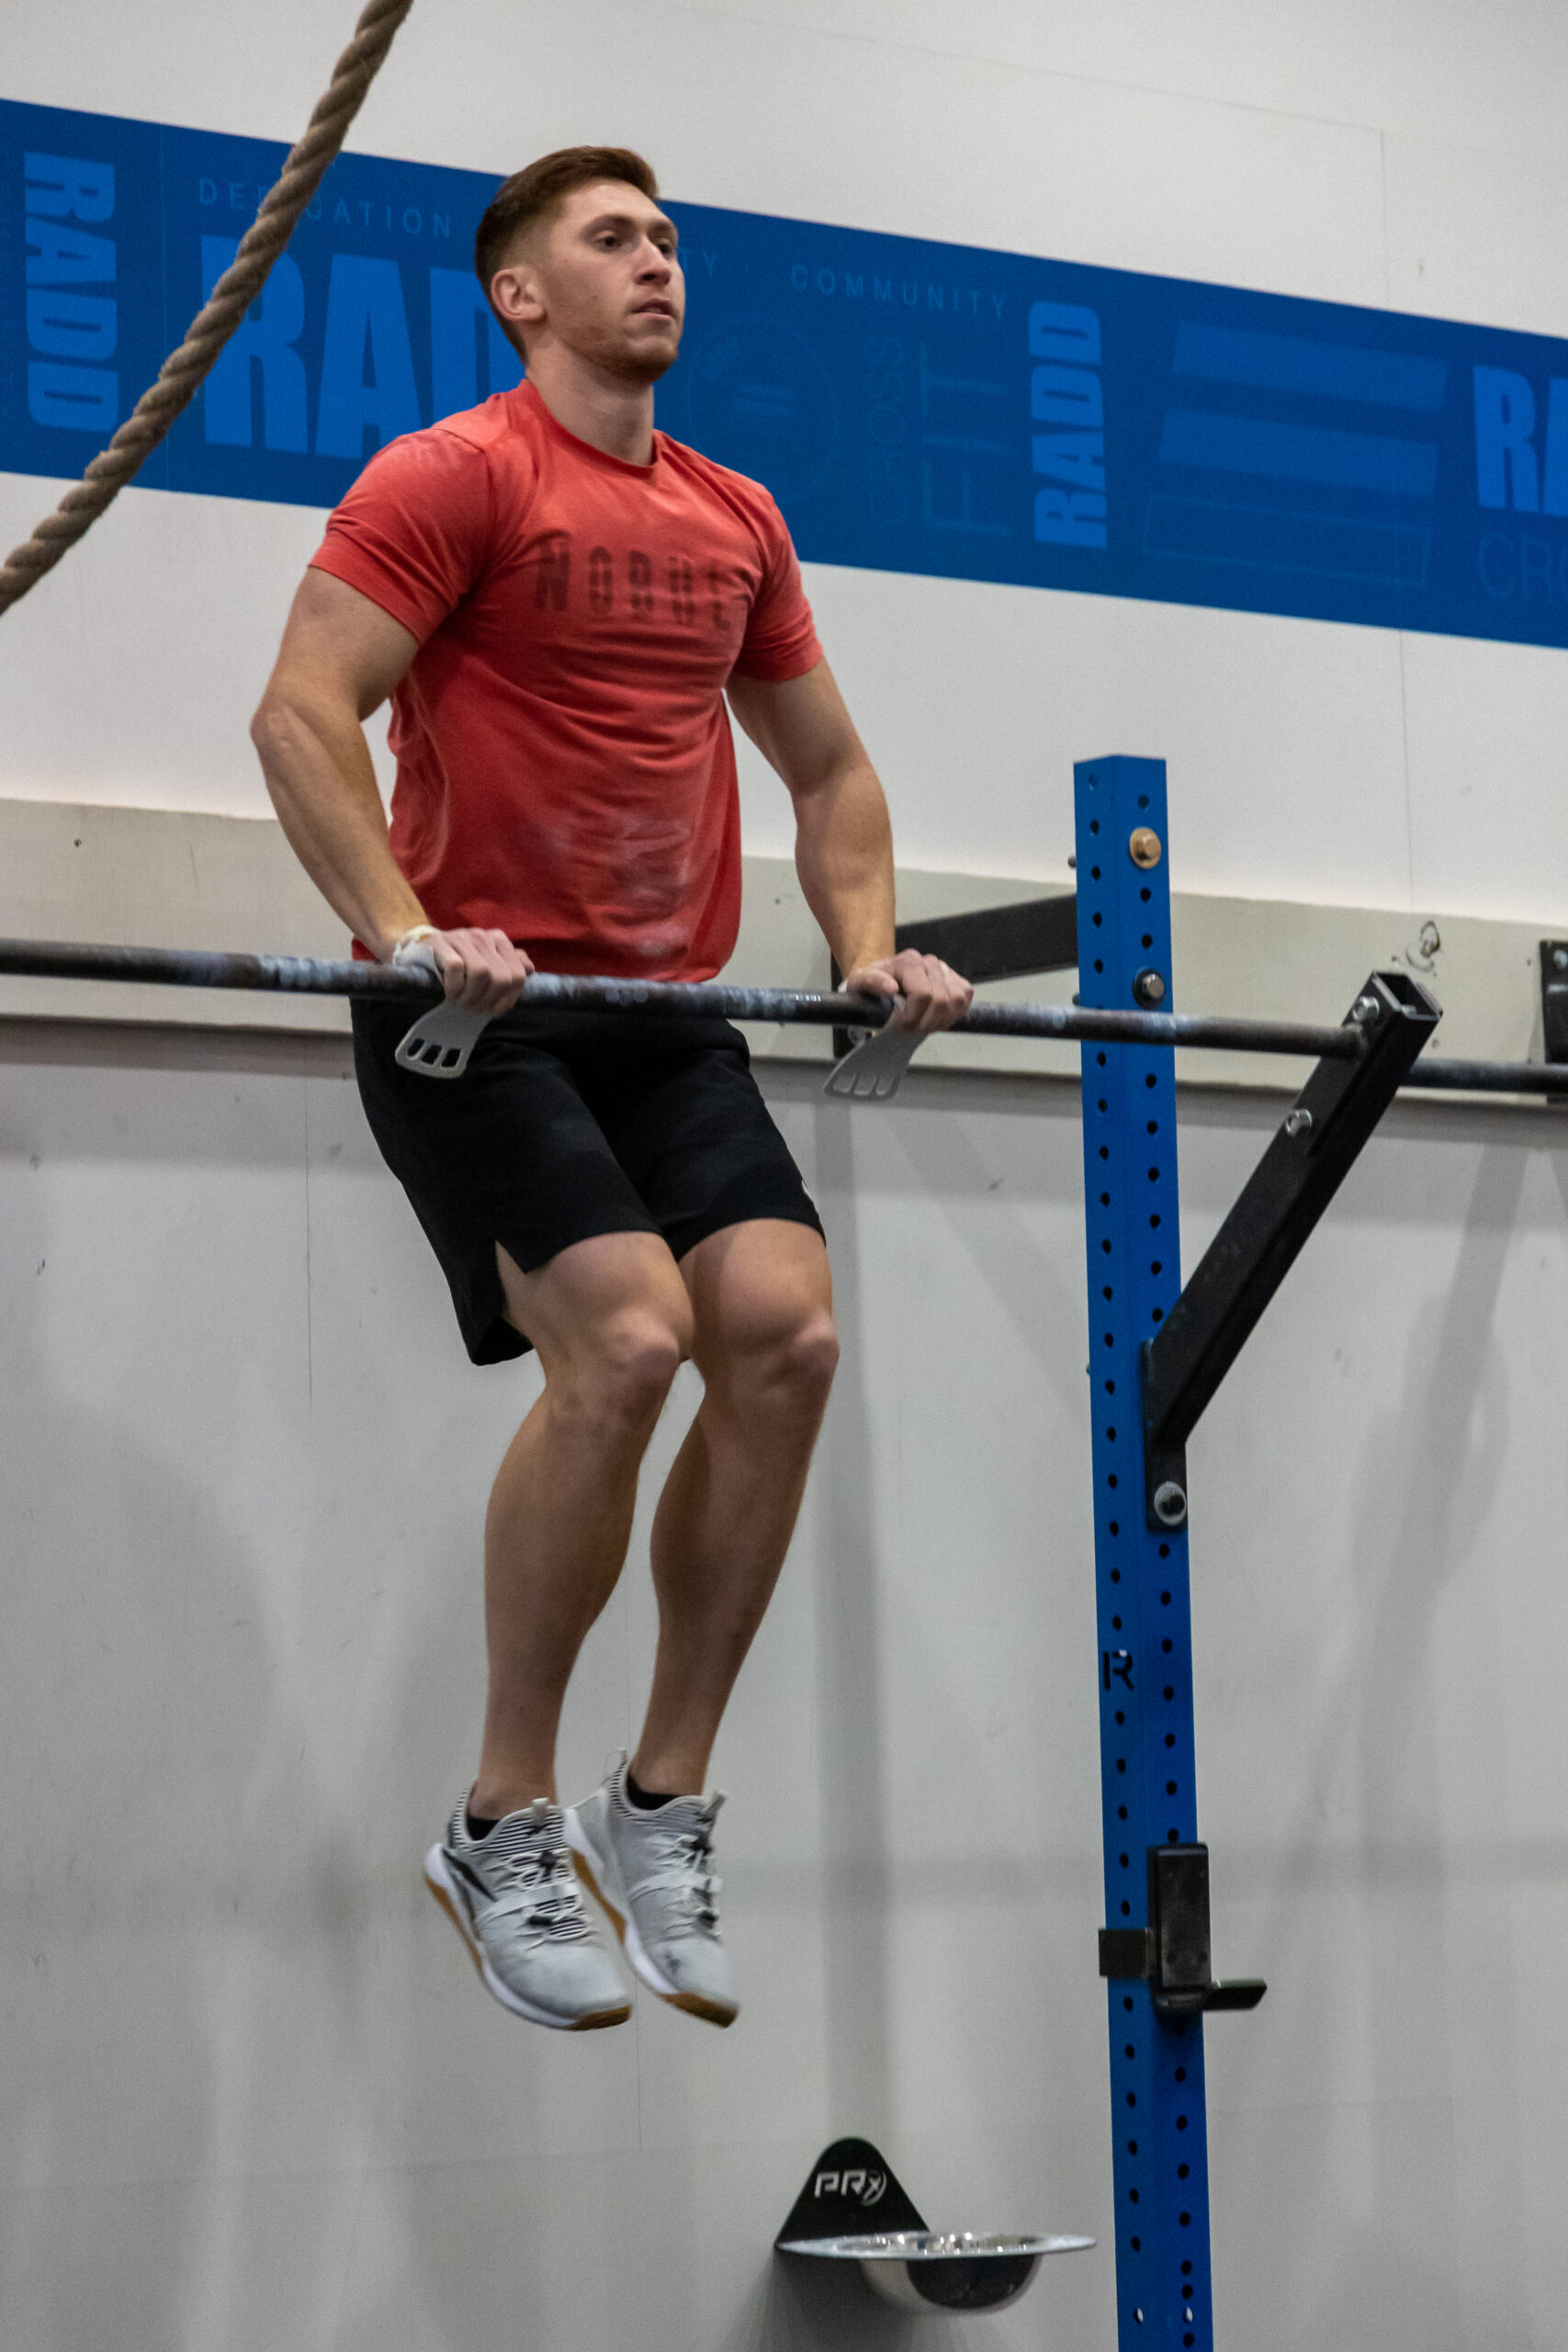 Tips and Tricks to Take Your CrossFit Performance to the Next Level